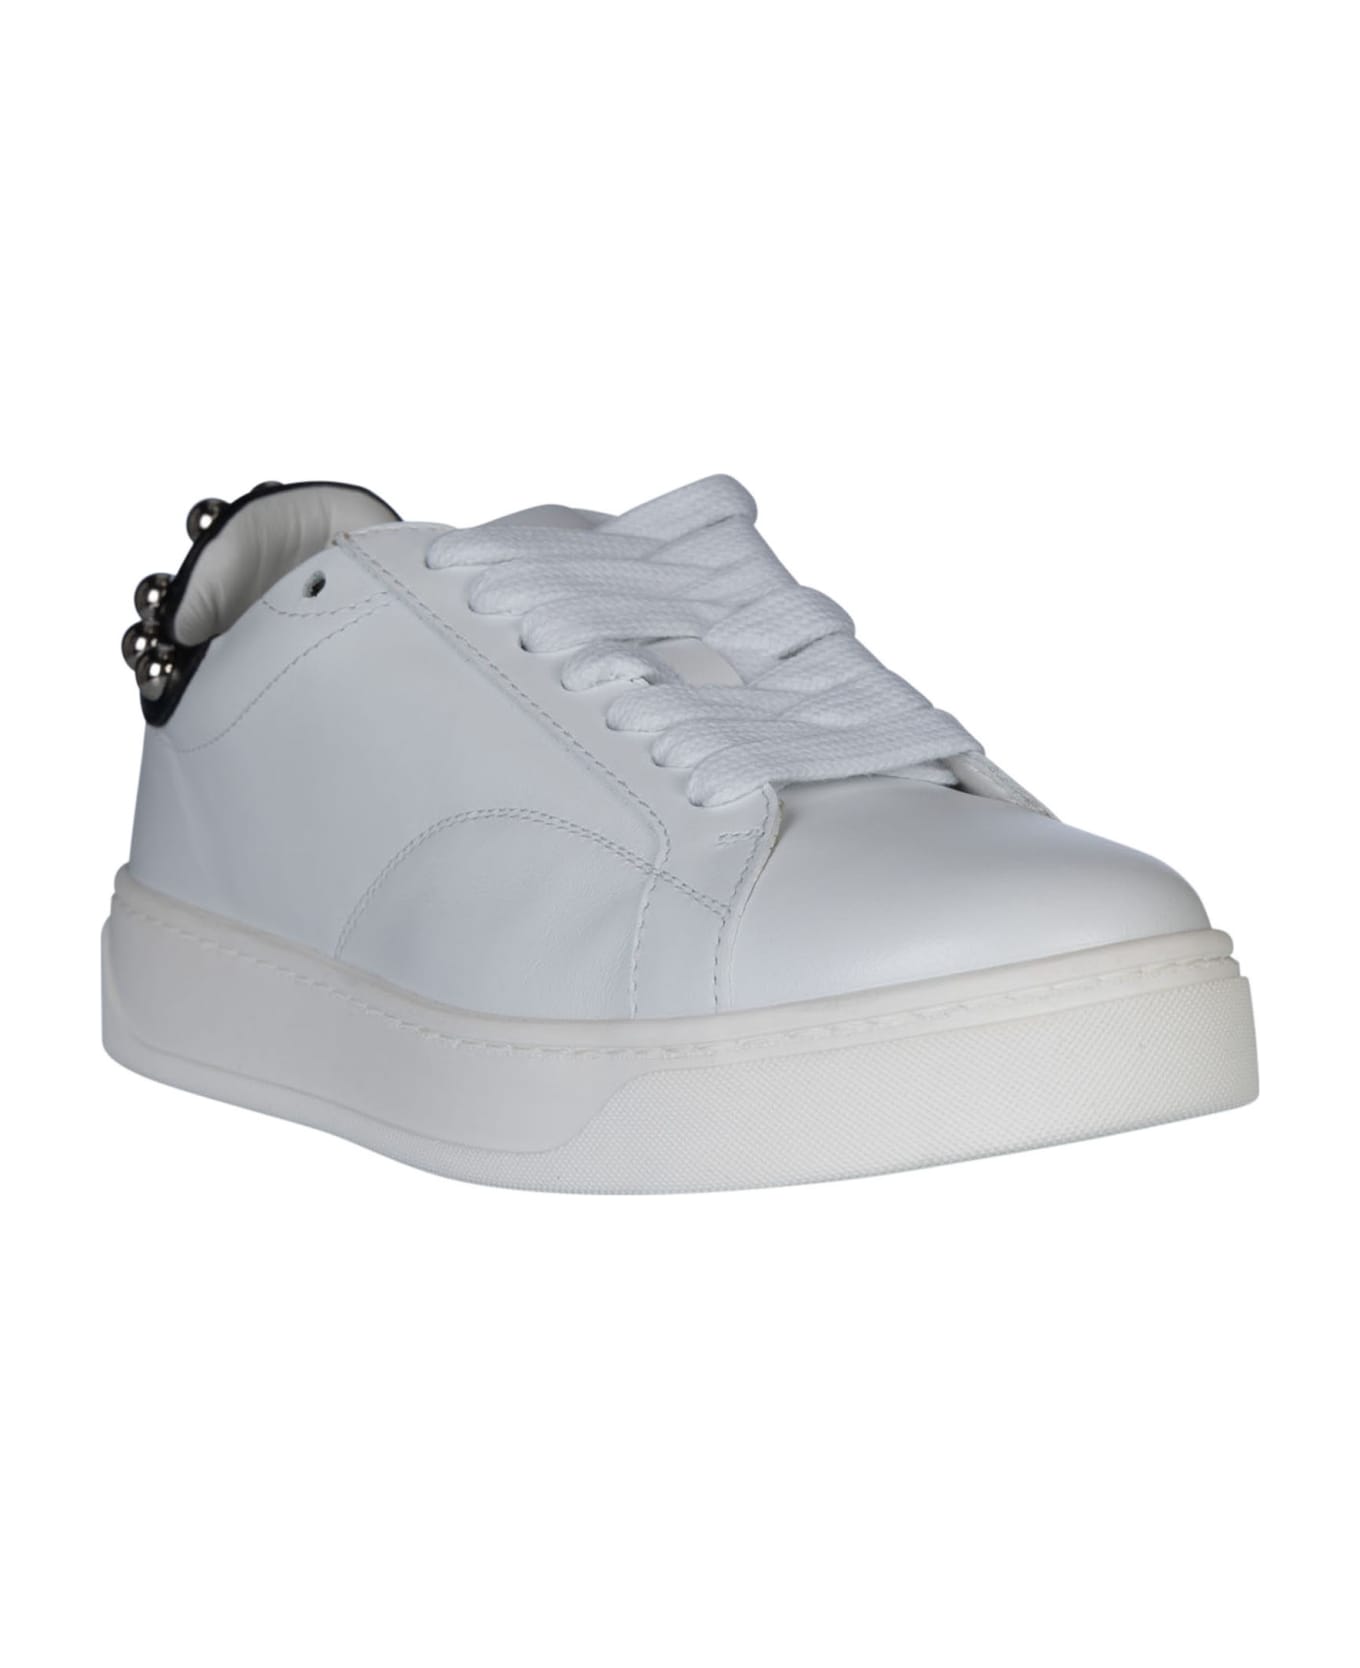 Lanvin Back Studded Sneakers - White/Silver